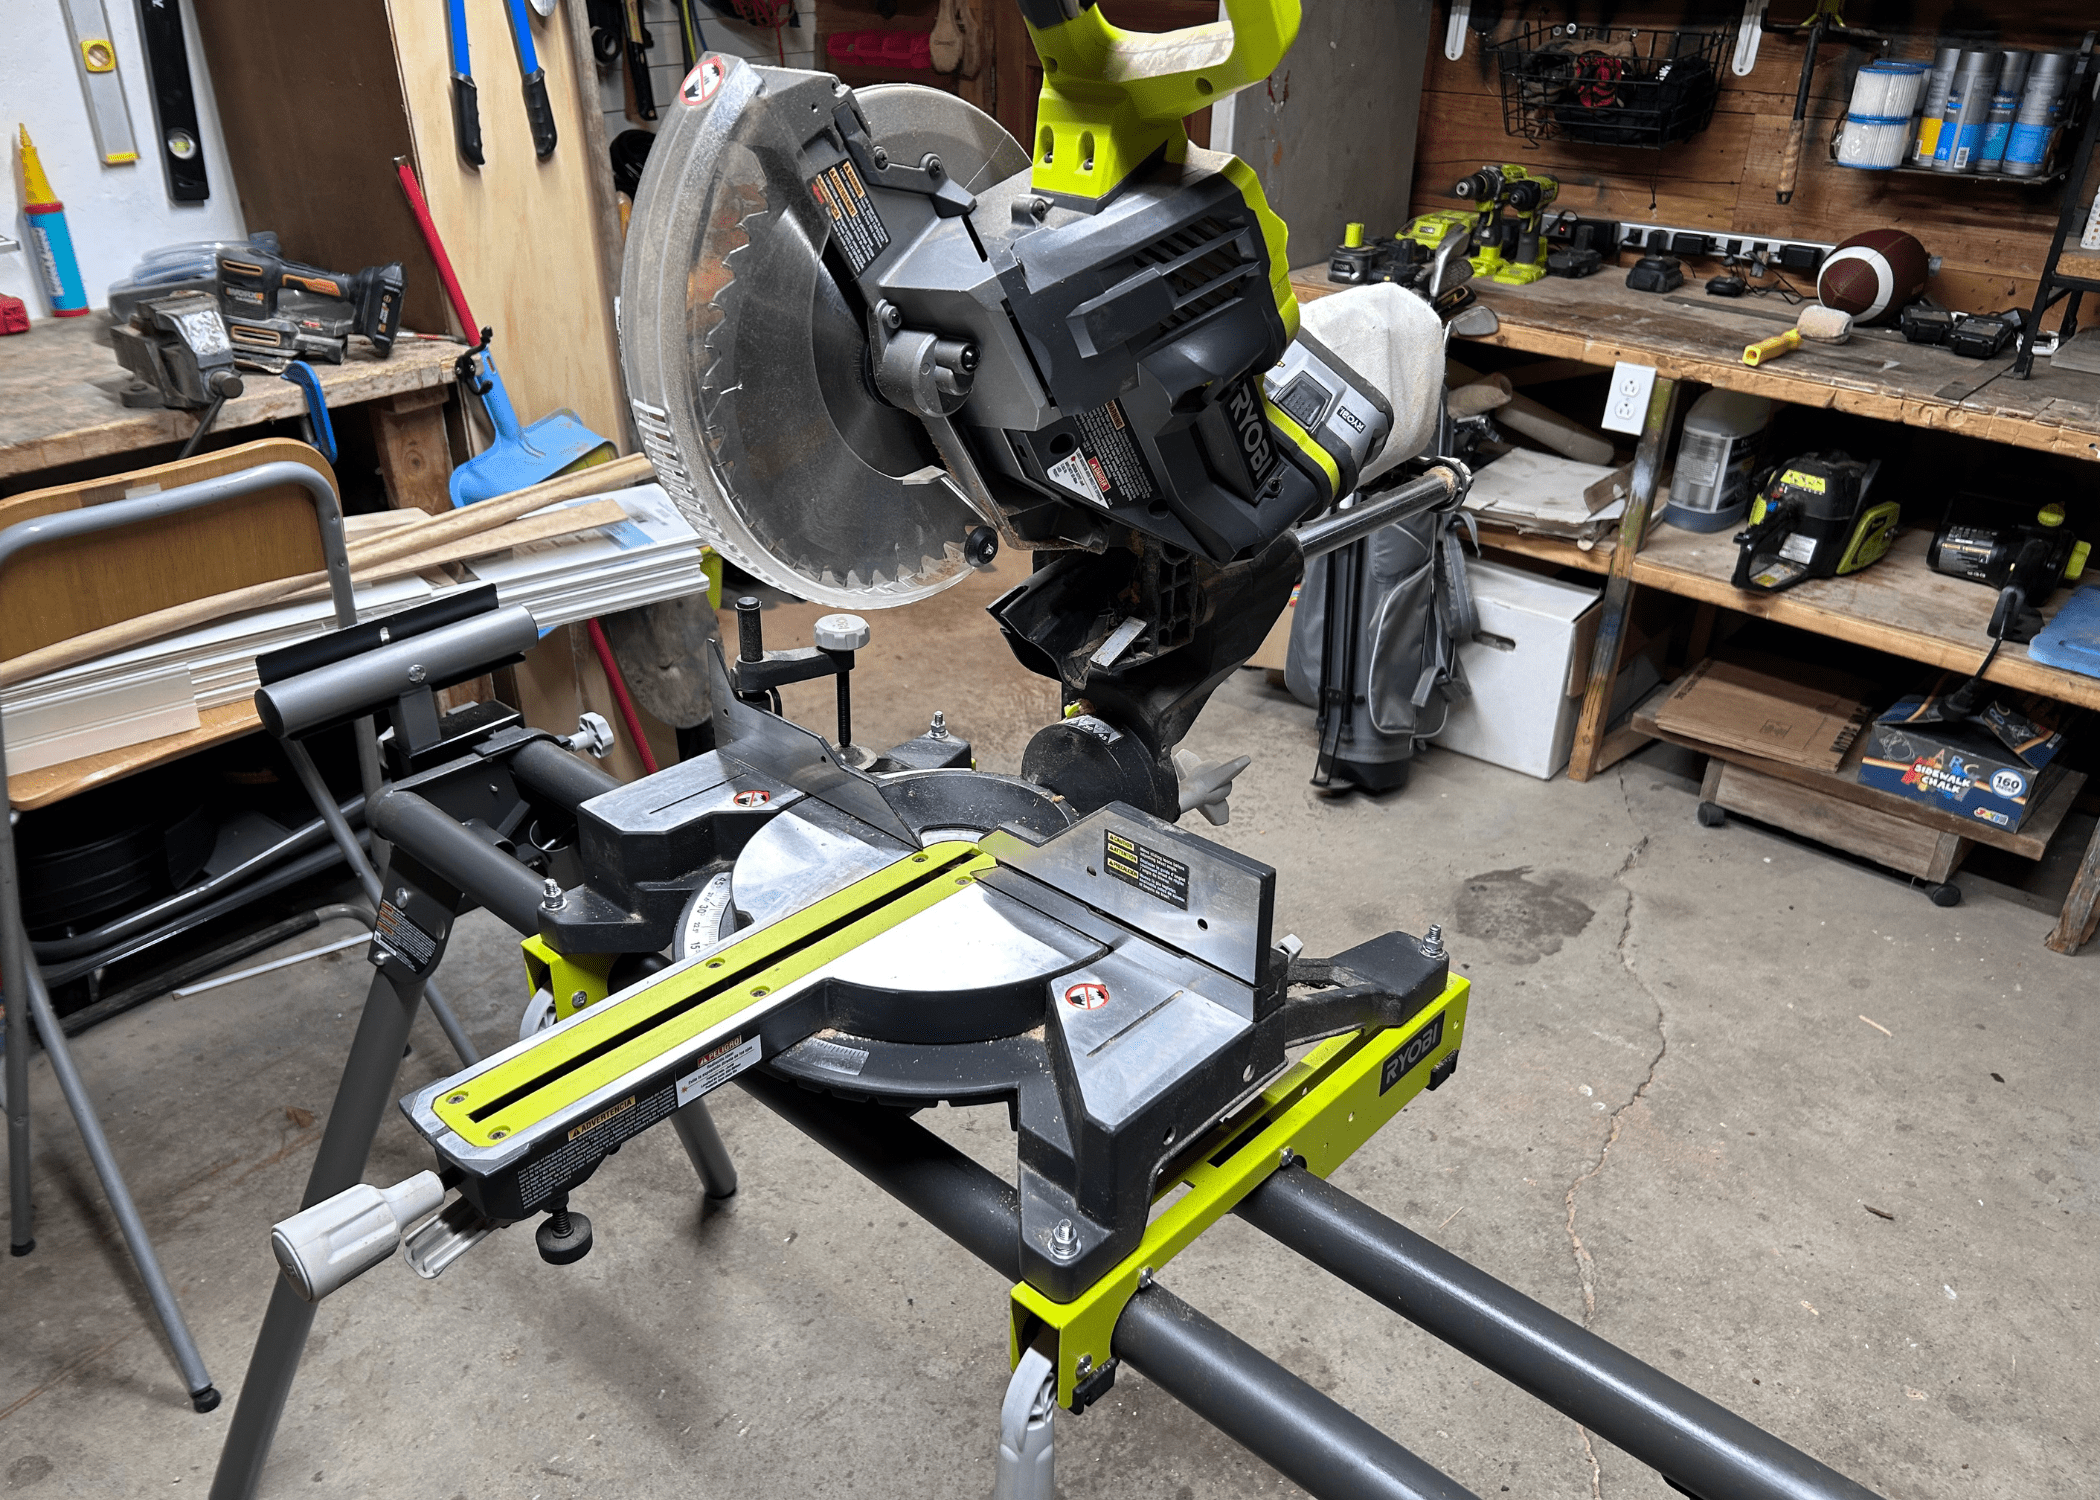 miter saw on a stand in a workshop